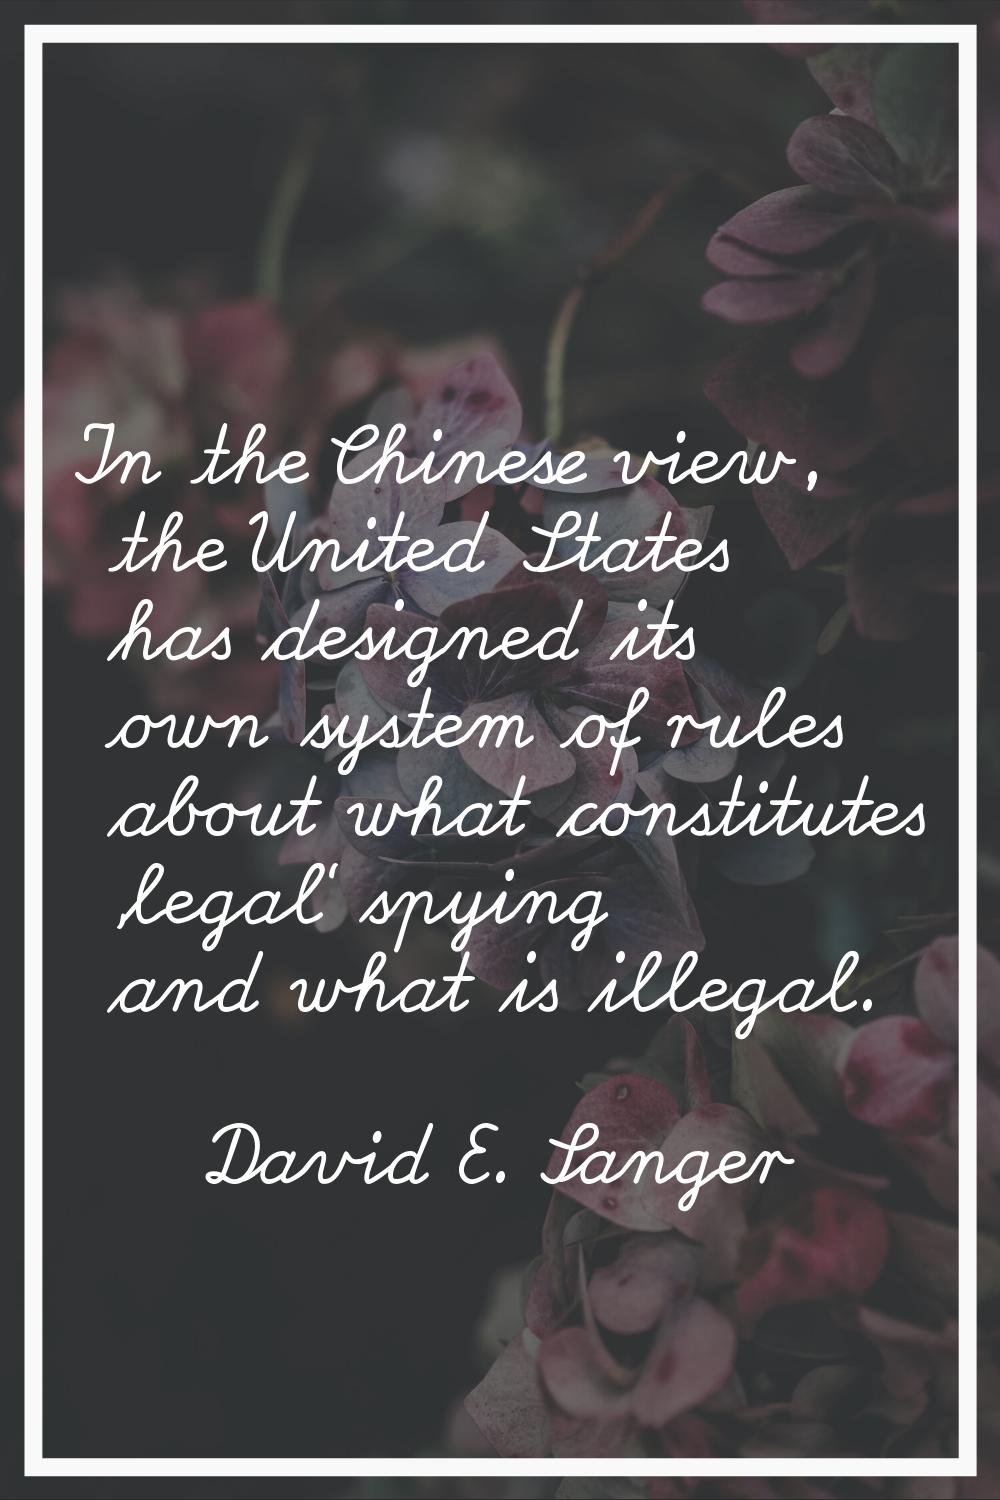 In the Chinese view, the United States has designed its own system of rules about what constitutes 